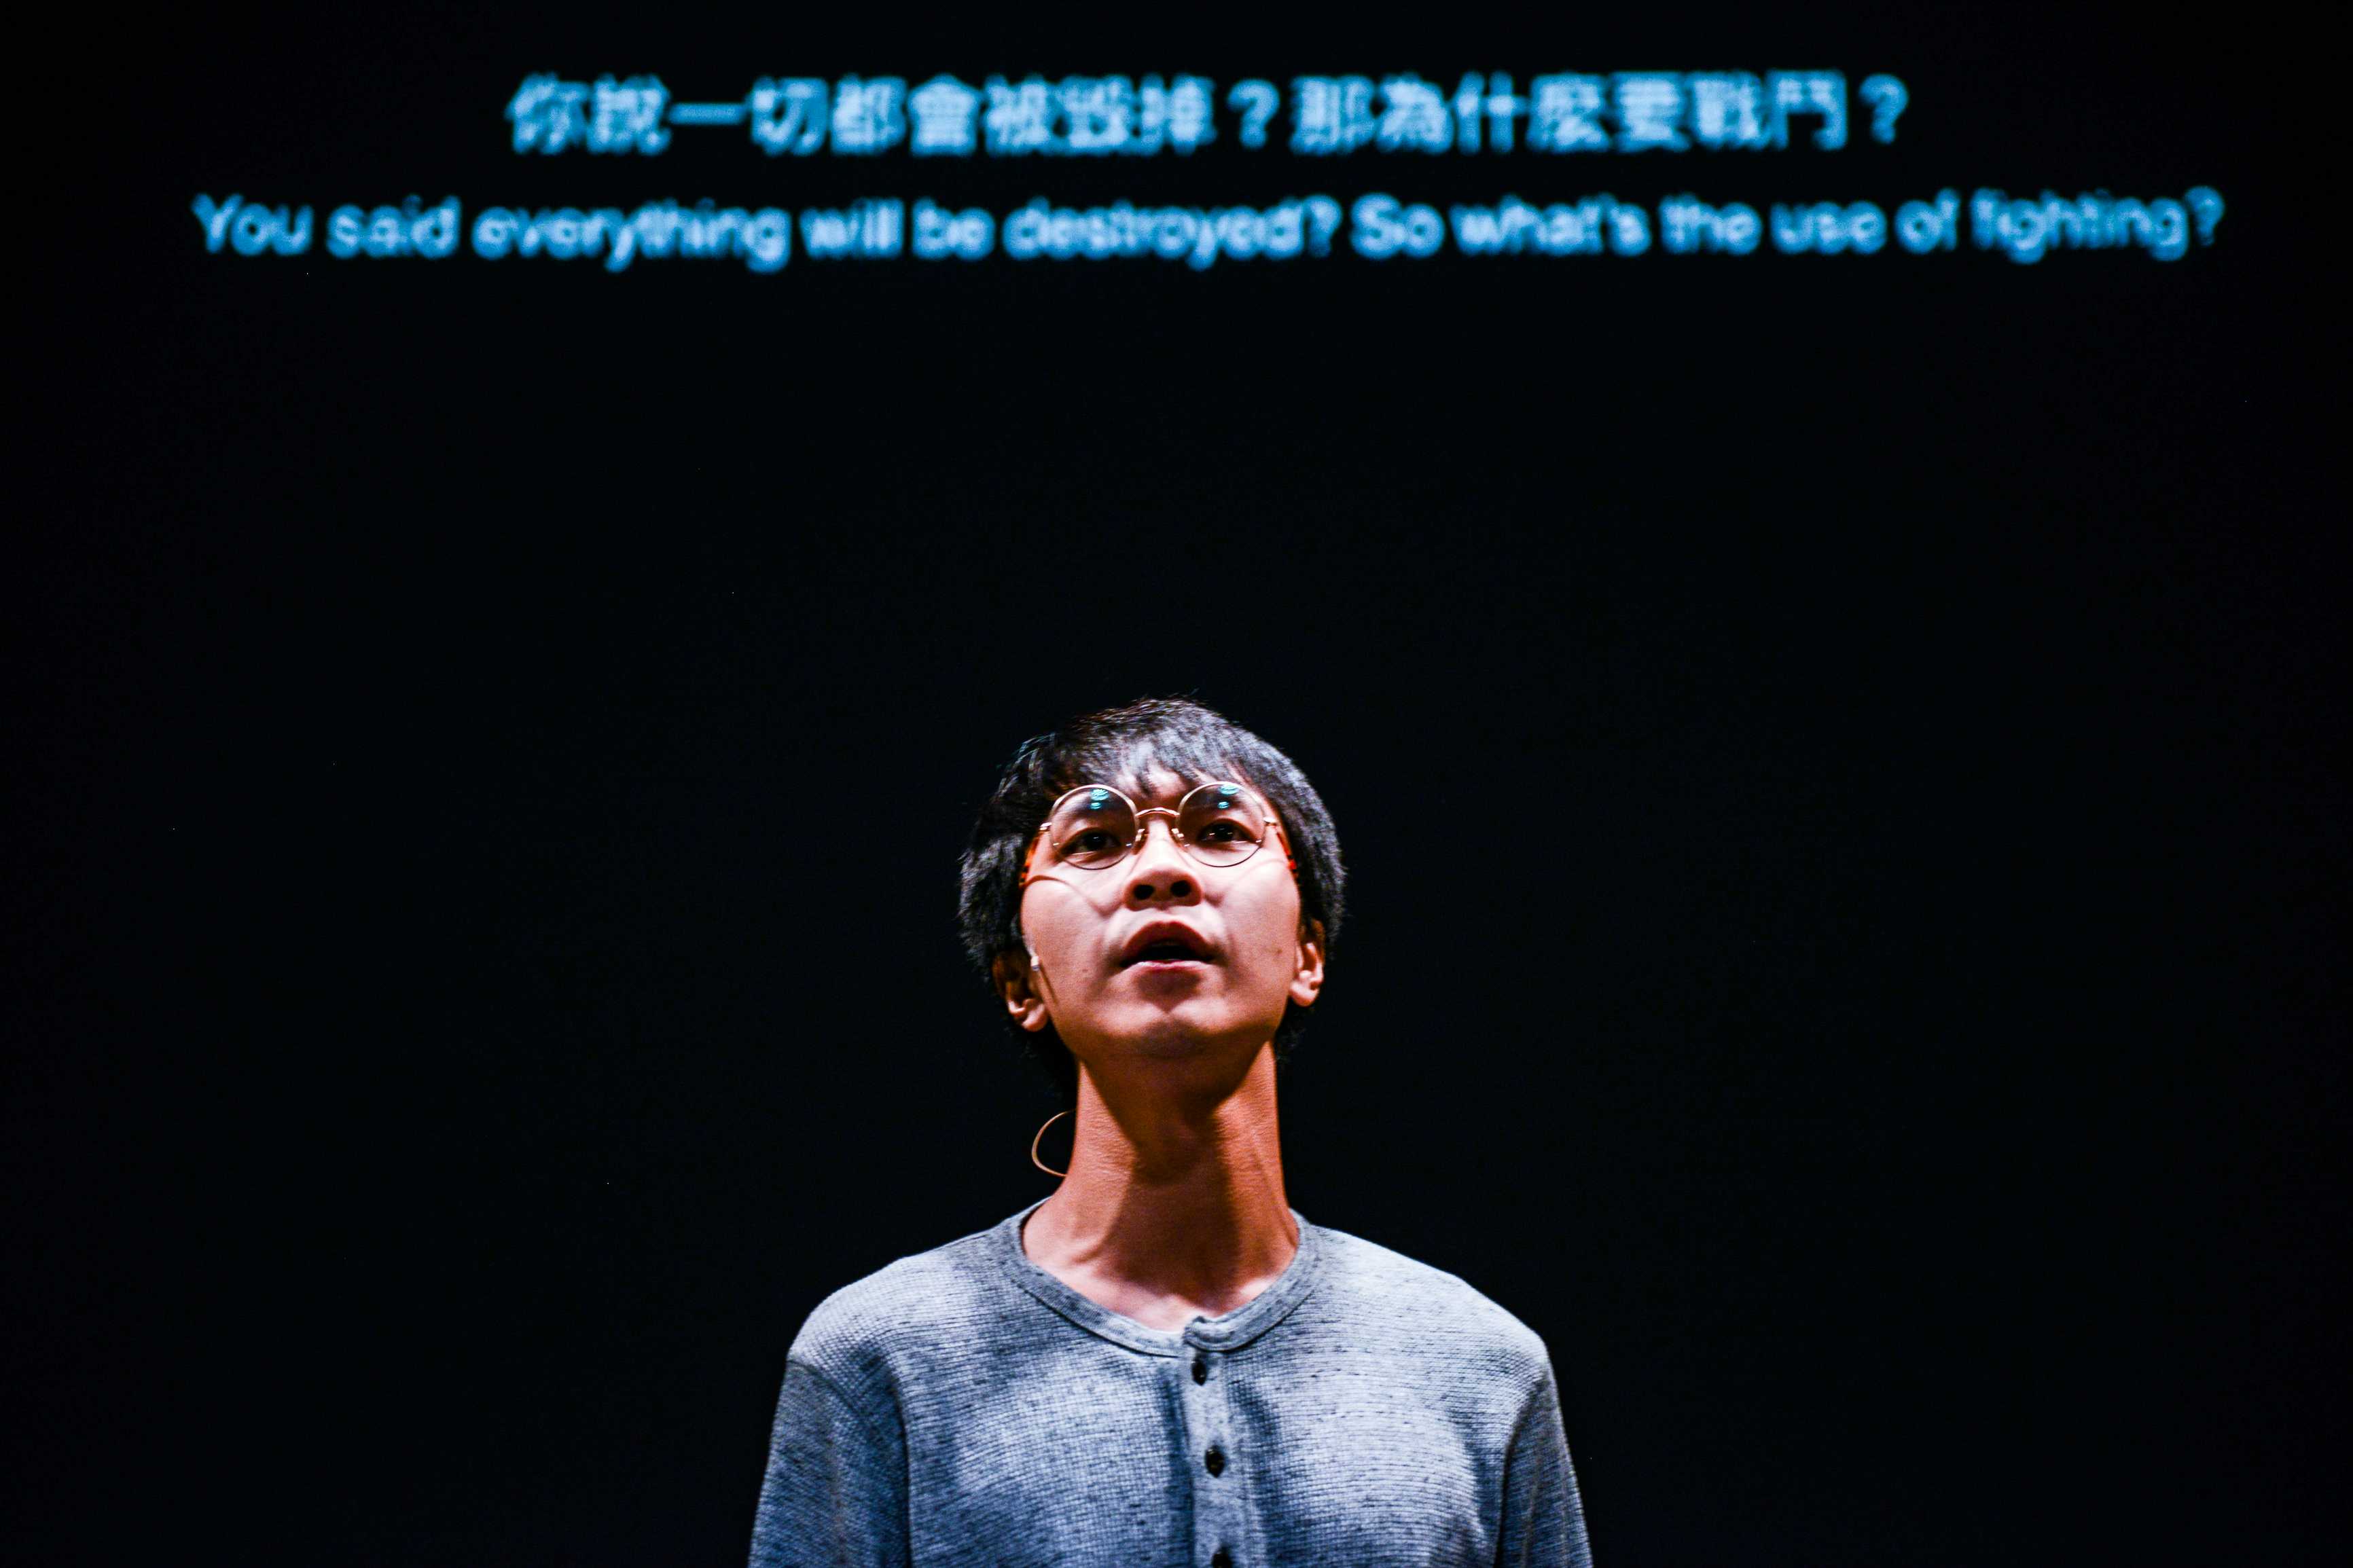 You said everything will be destroyed? So what’s the use of fighting? | Featuring: Ng King Lung | Tagged as: Show, Testimony | Photo: Fung Wai Sun |  (Rooftop Productions • Hong Kong Theatre Company)  | Rooftop Productions • Hong Kong Theatre Company